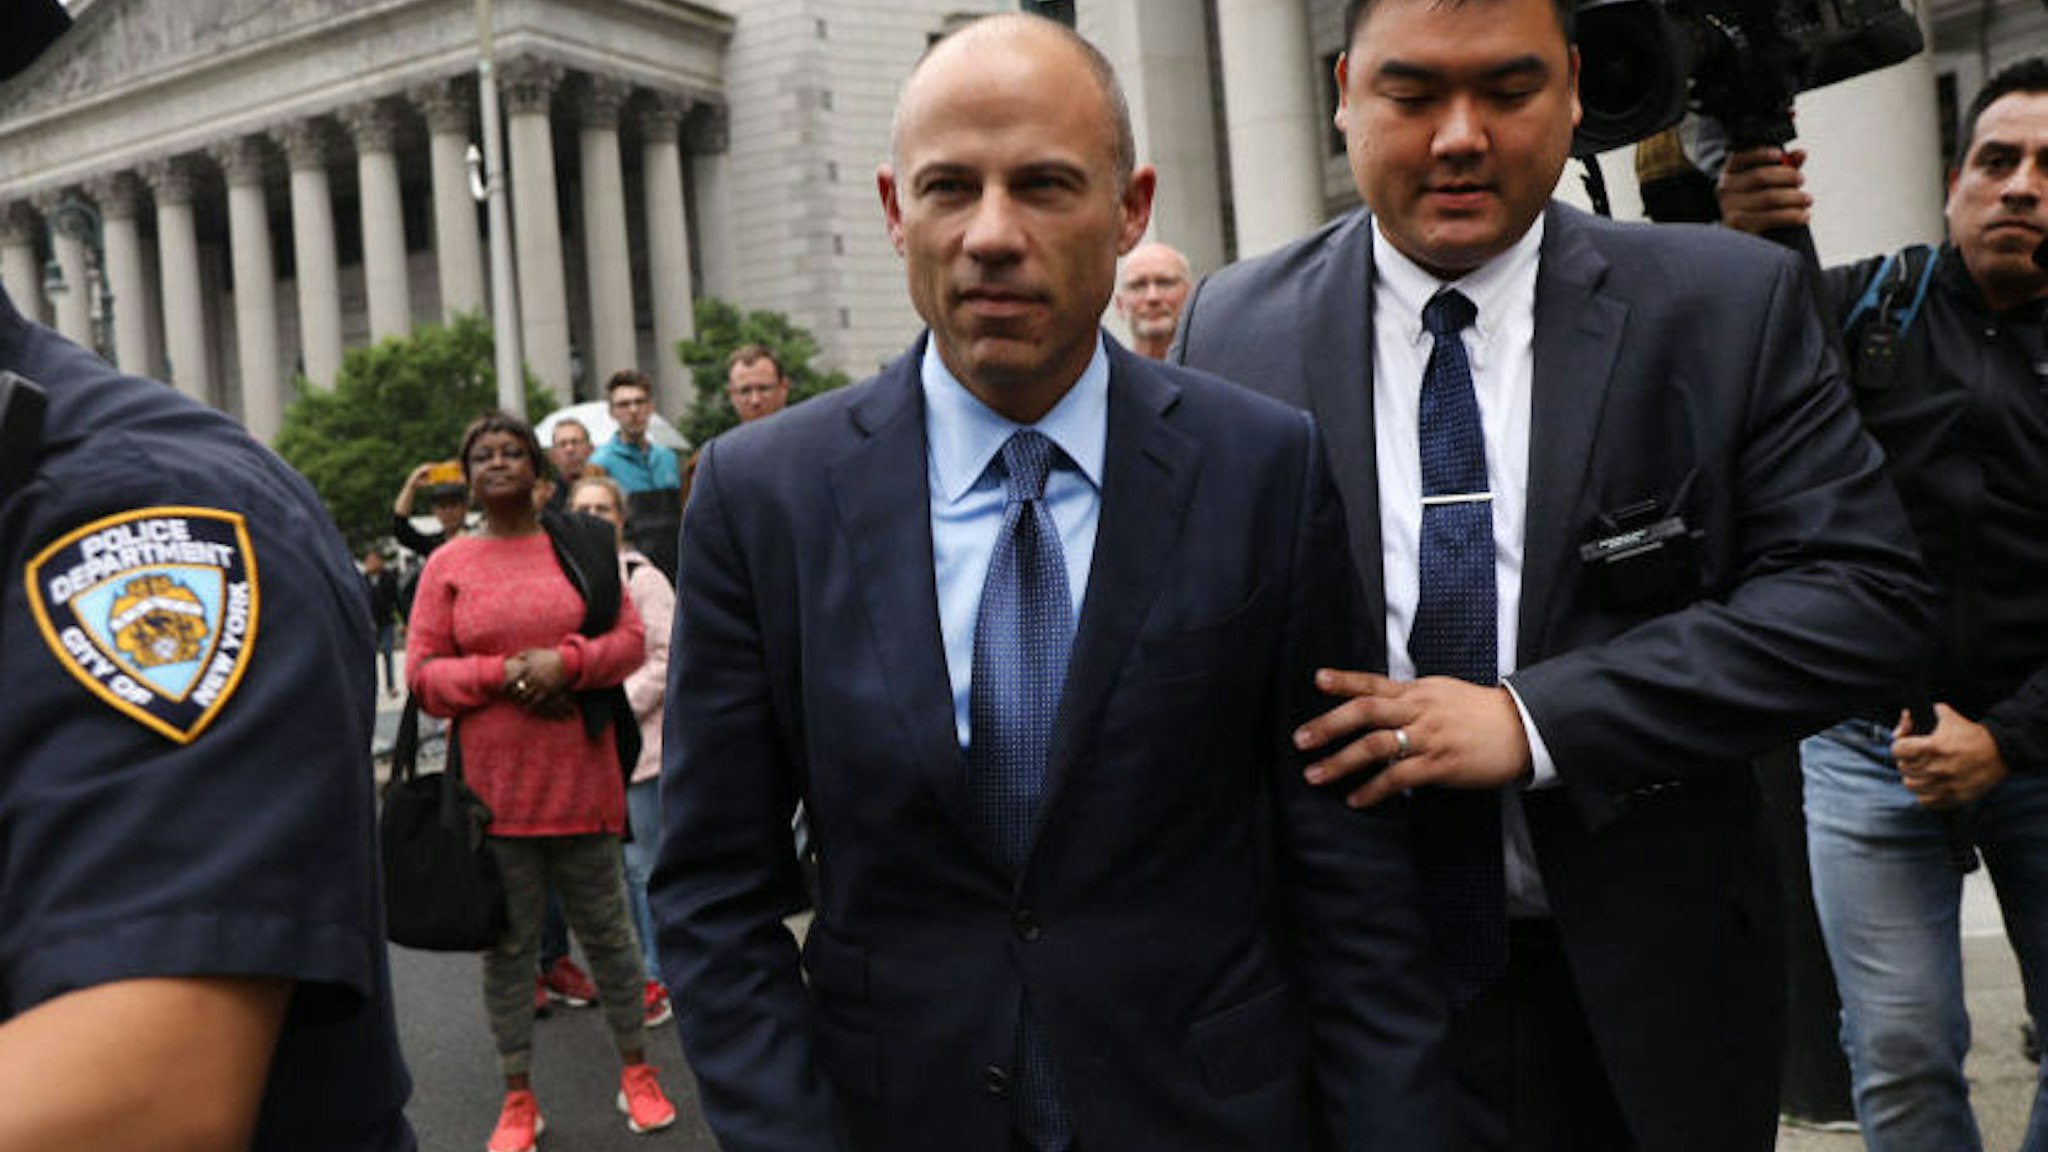 NEW YORK, NEW YORK - MAY 28: Celebrity attorney Michael Avenatti walks out of a New York court house after pleading not guilty Tuesday in federal court in a case where he is accused of stealing $300,000 from a former client, adult-film actress Stormy Daniels. on May 28, 2019 in New York City. A grand jury has indicted Avenatti for the Daniels-related case and a second case in which prosecutors say he attempted to extort more than $20 million from sportswear giant Nike.